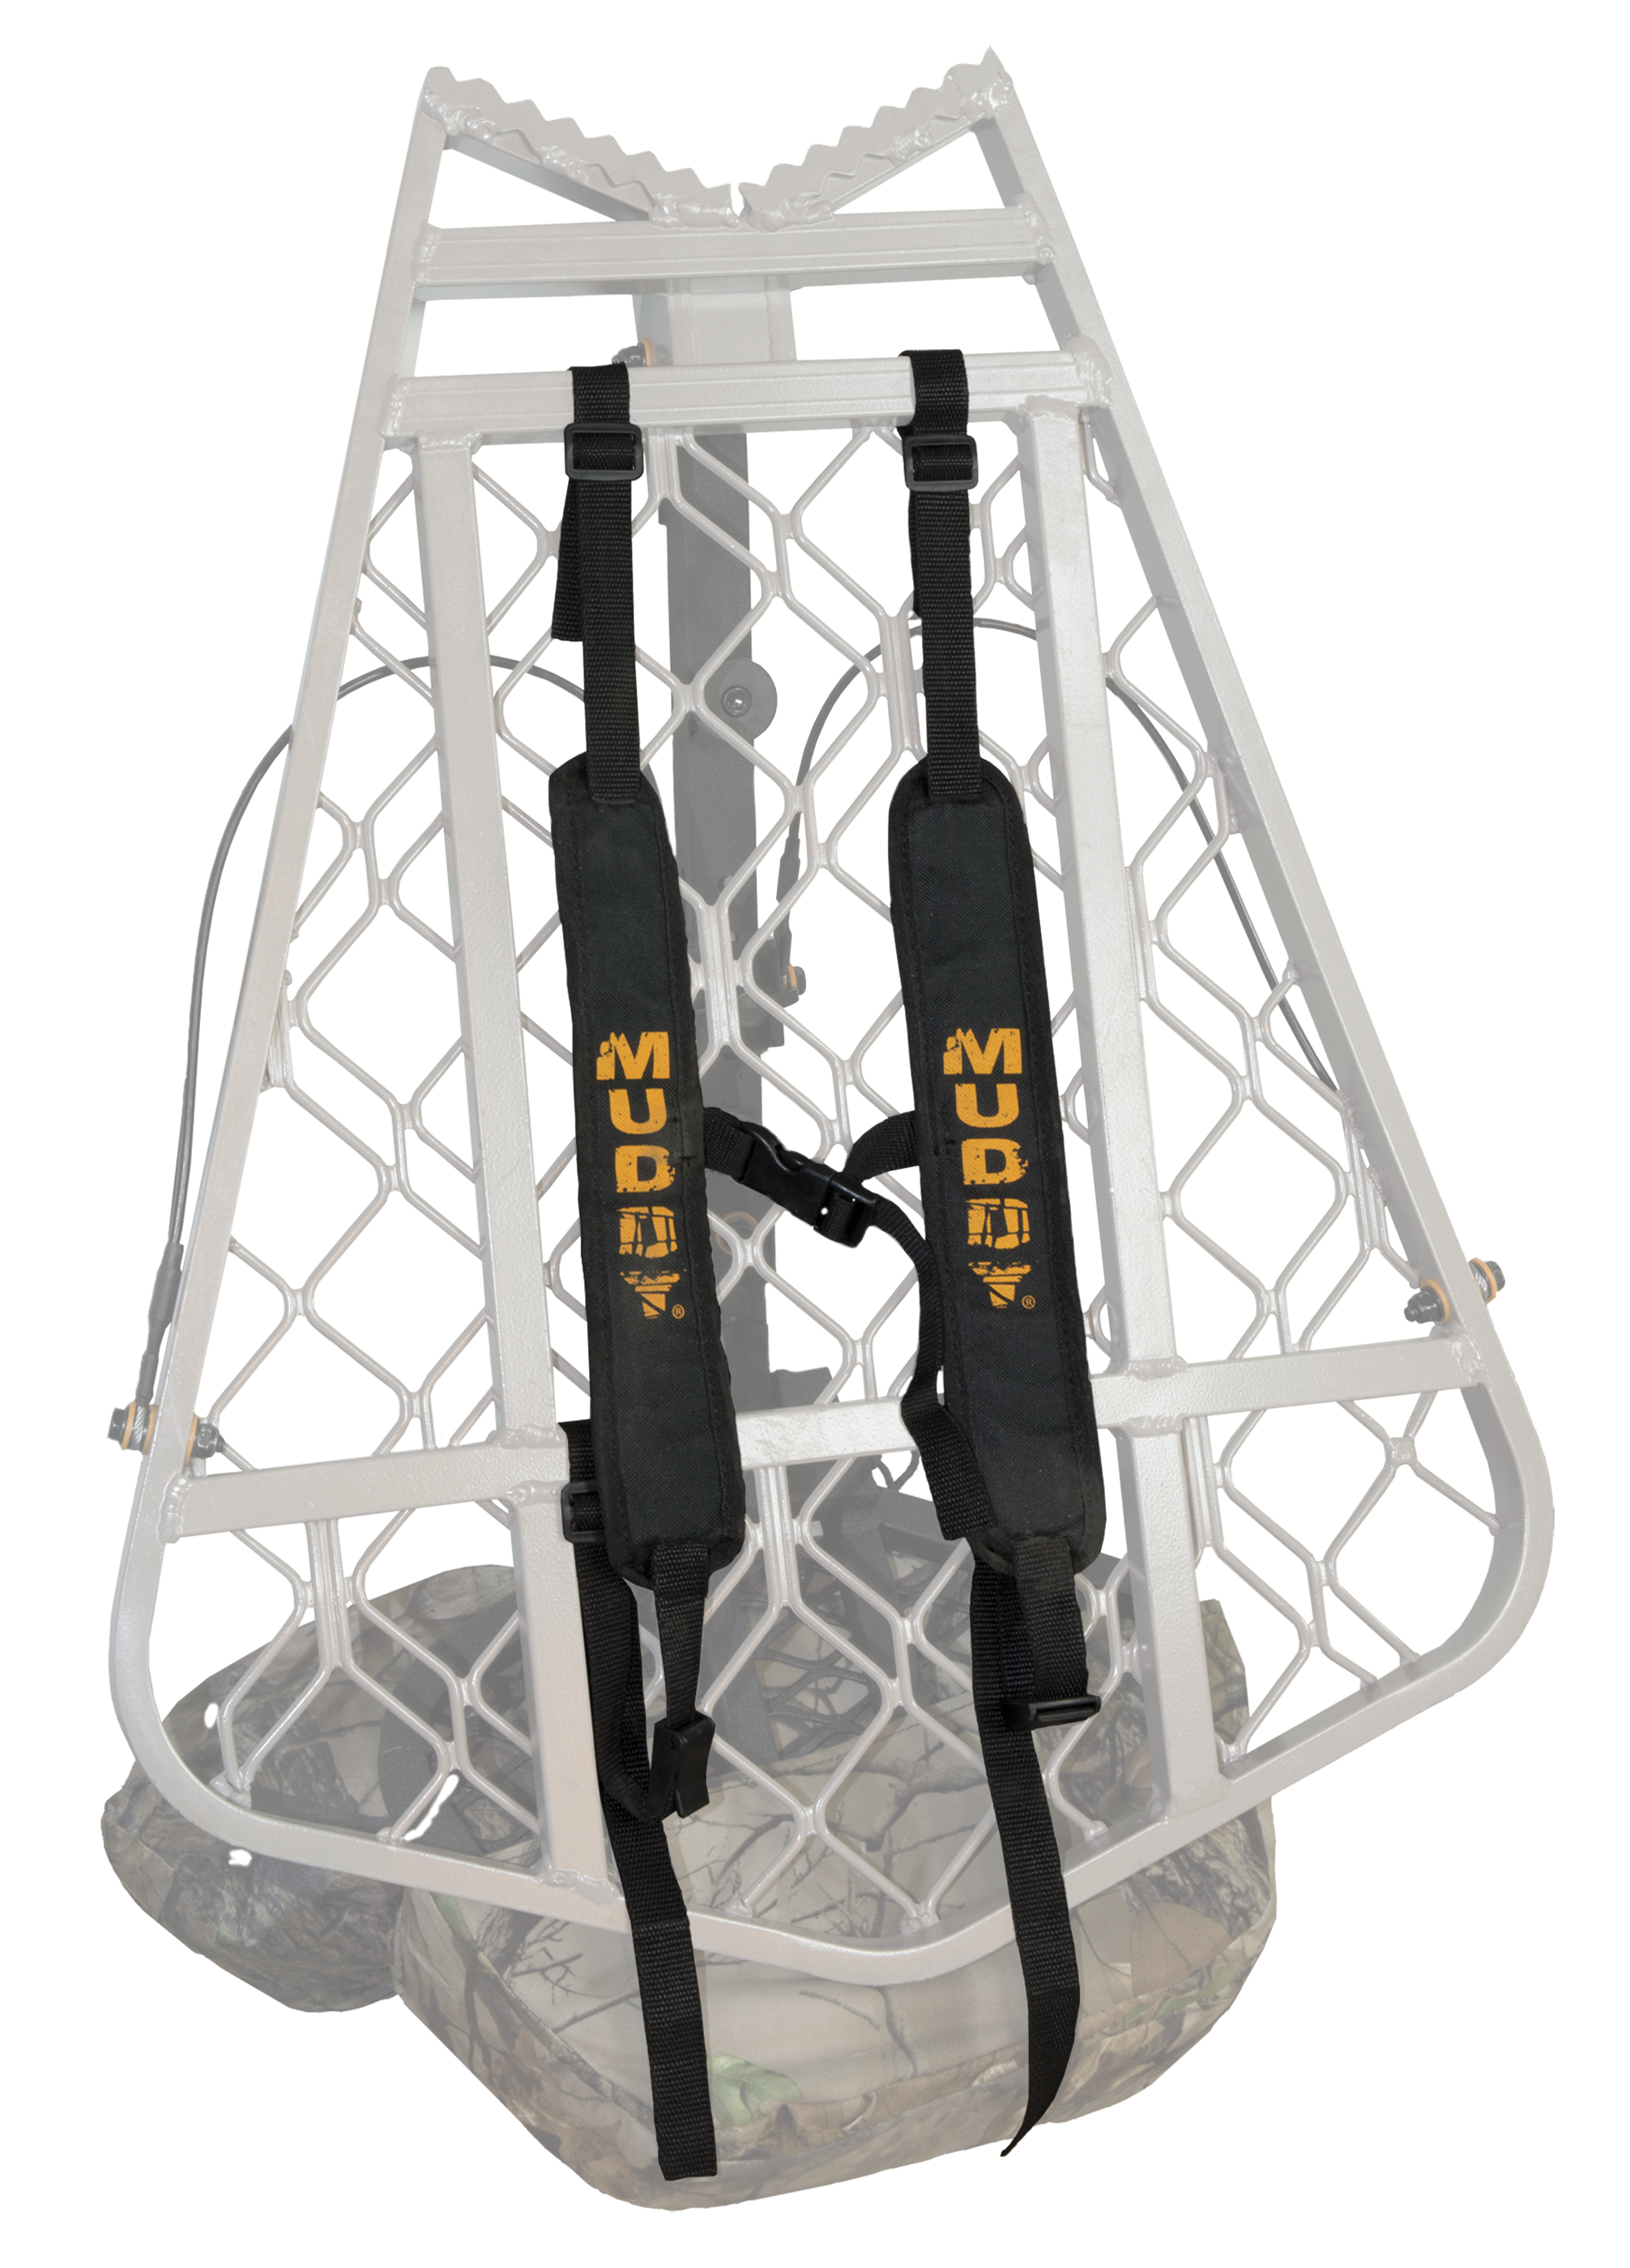 Muddy Backpack Straps for Hang-On Treestands